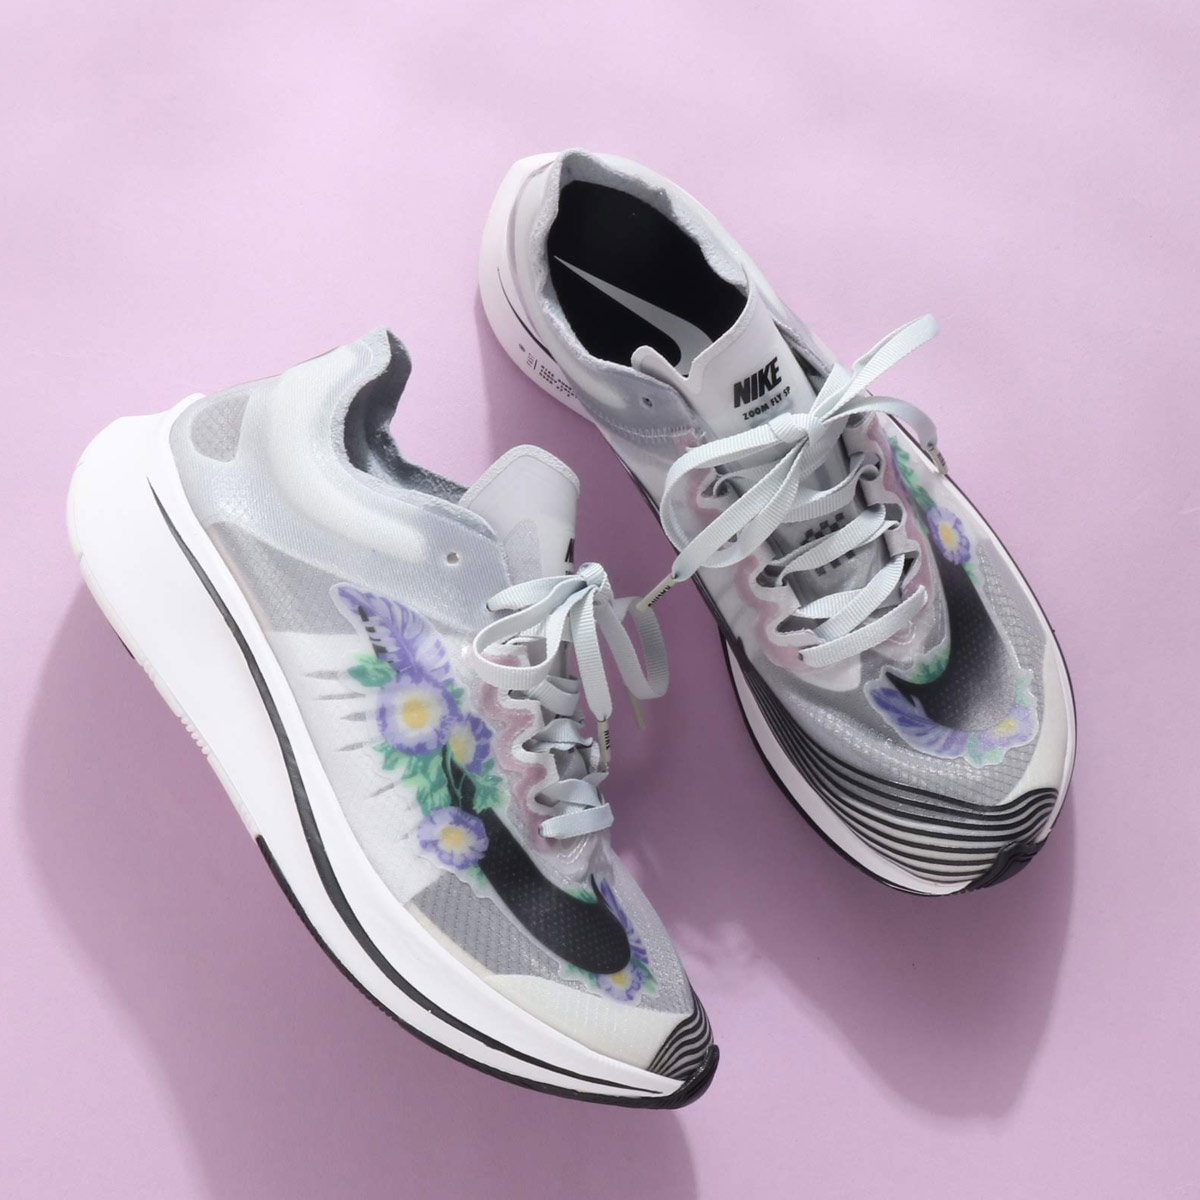 nike zoom fly sp gpx rs